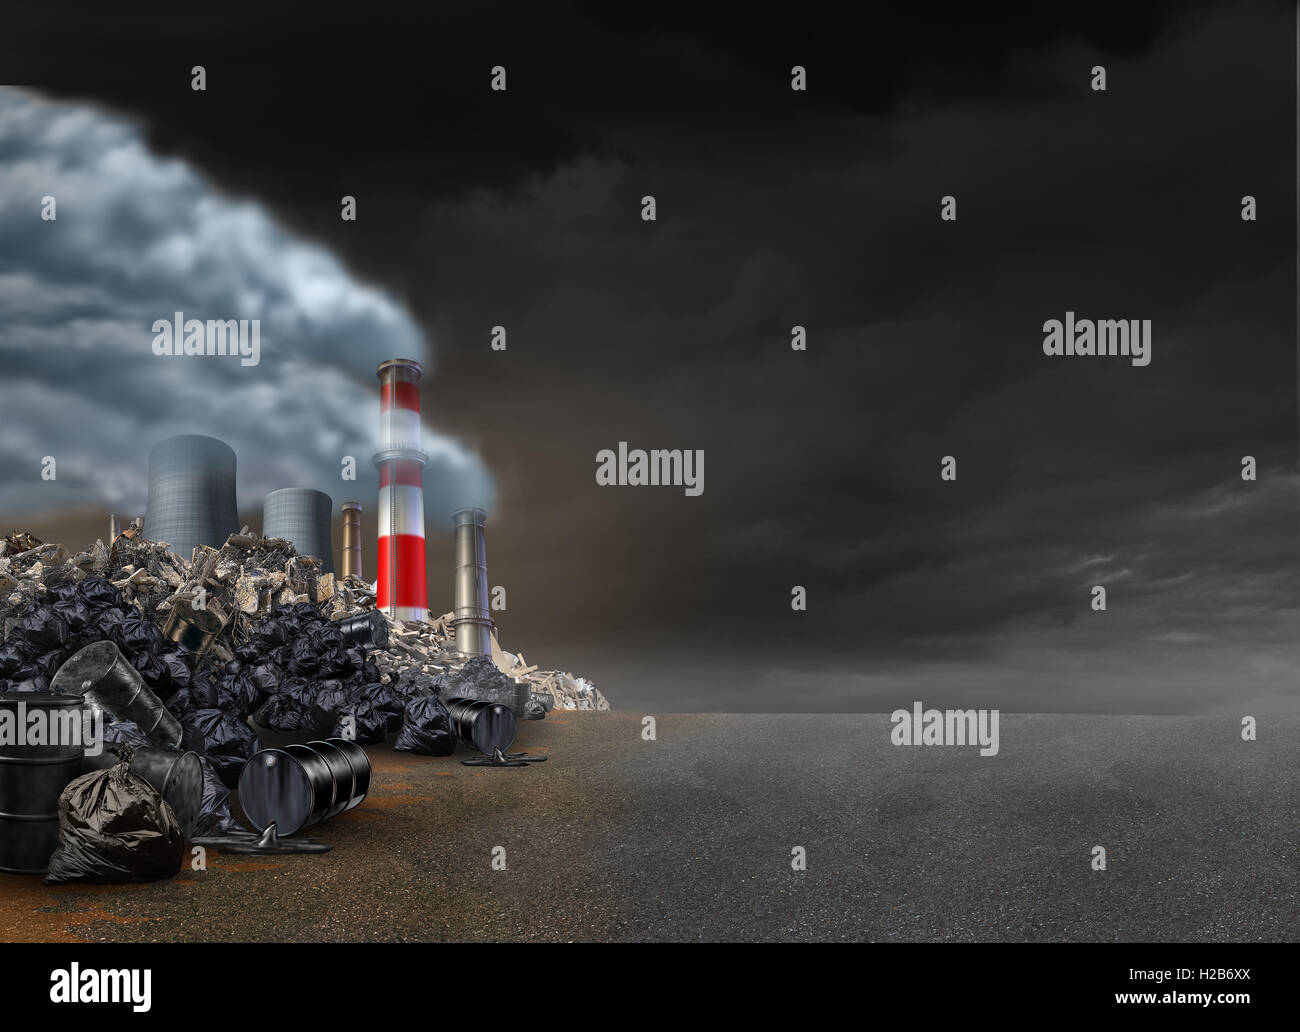 Pollution background and power plant emitting polluted air with smokestacks and toxic garbage in an urban setting with blank text area as an environmental symbol with 3D illustration elements. Stock Photo